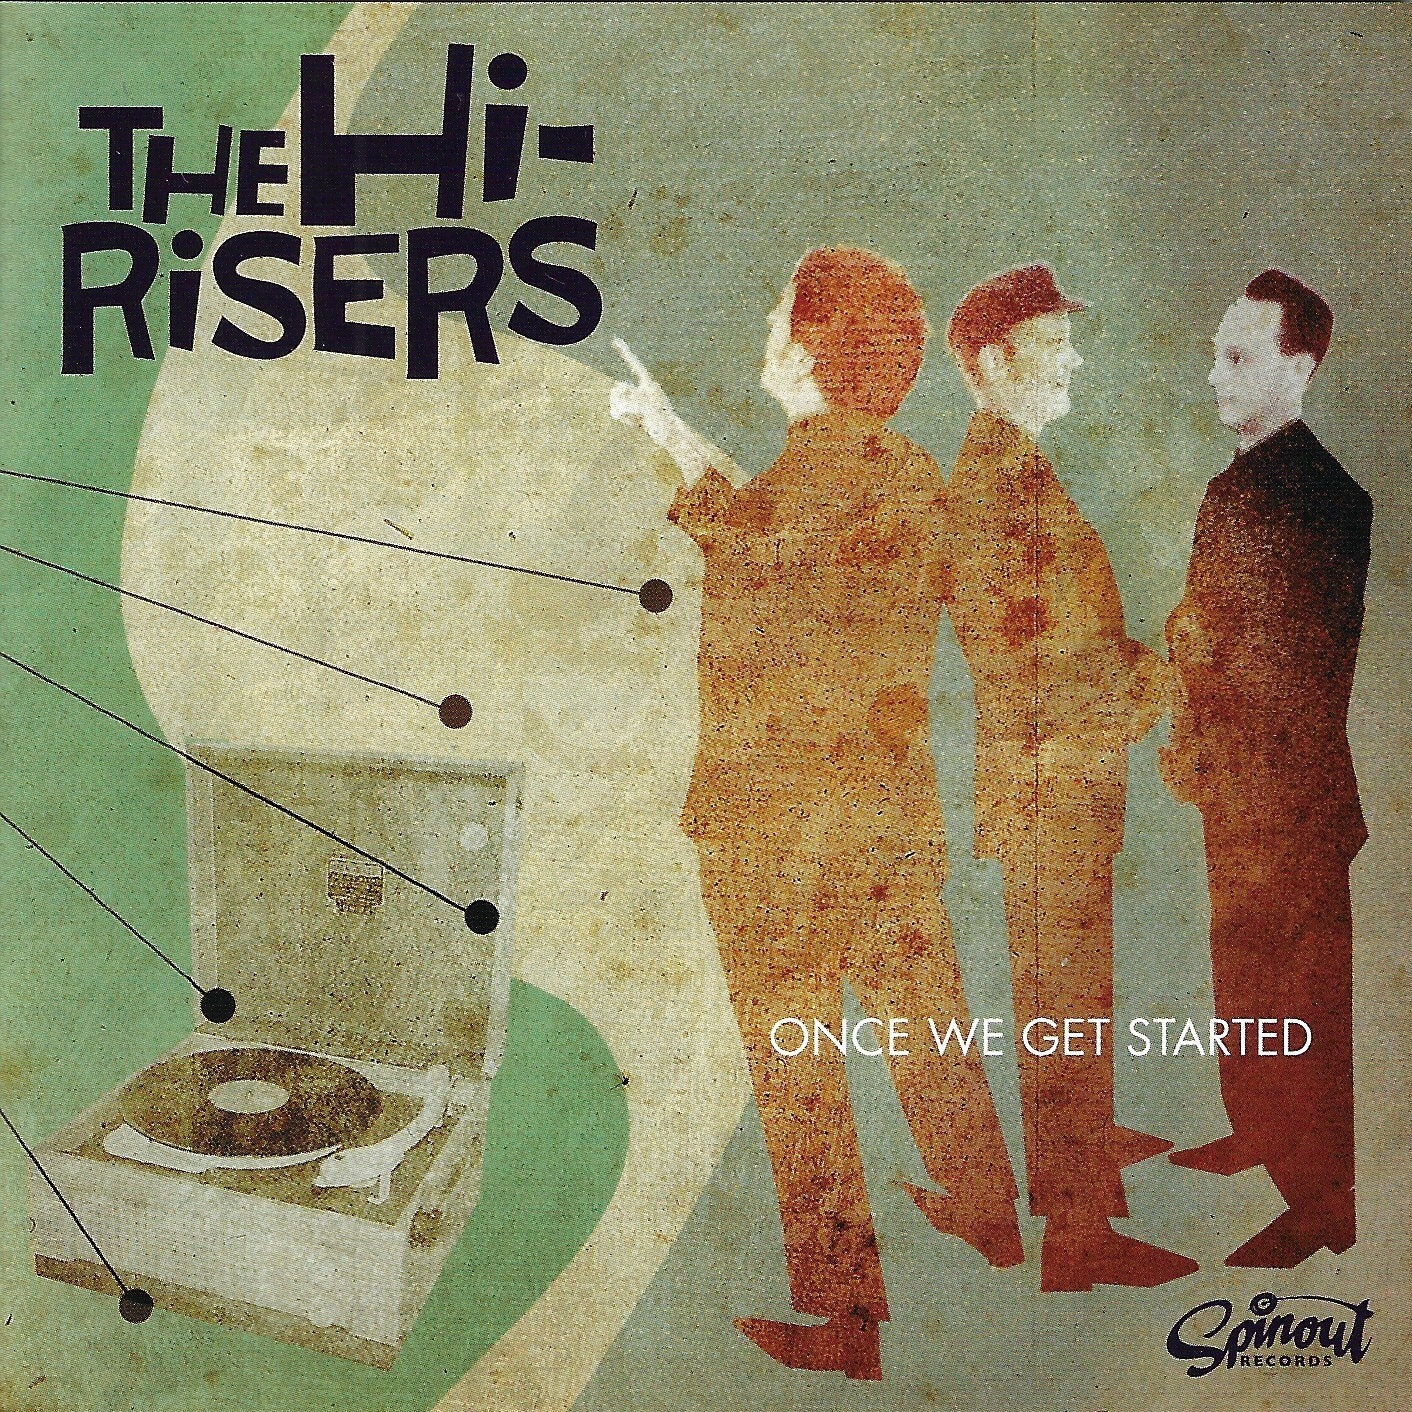 The Hi-Risers "Once We Get Started" CD